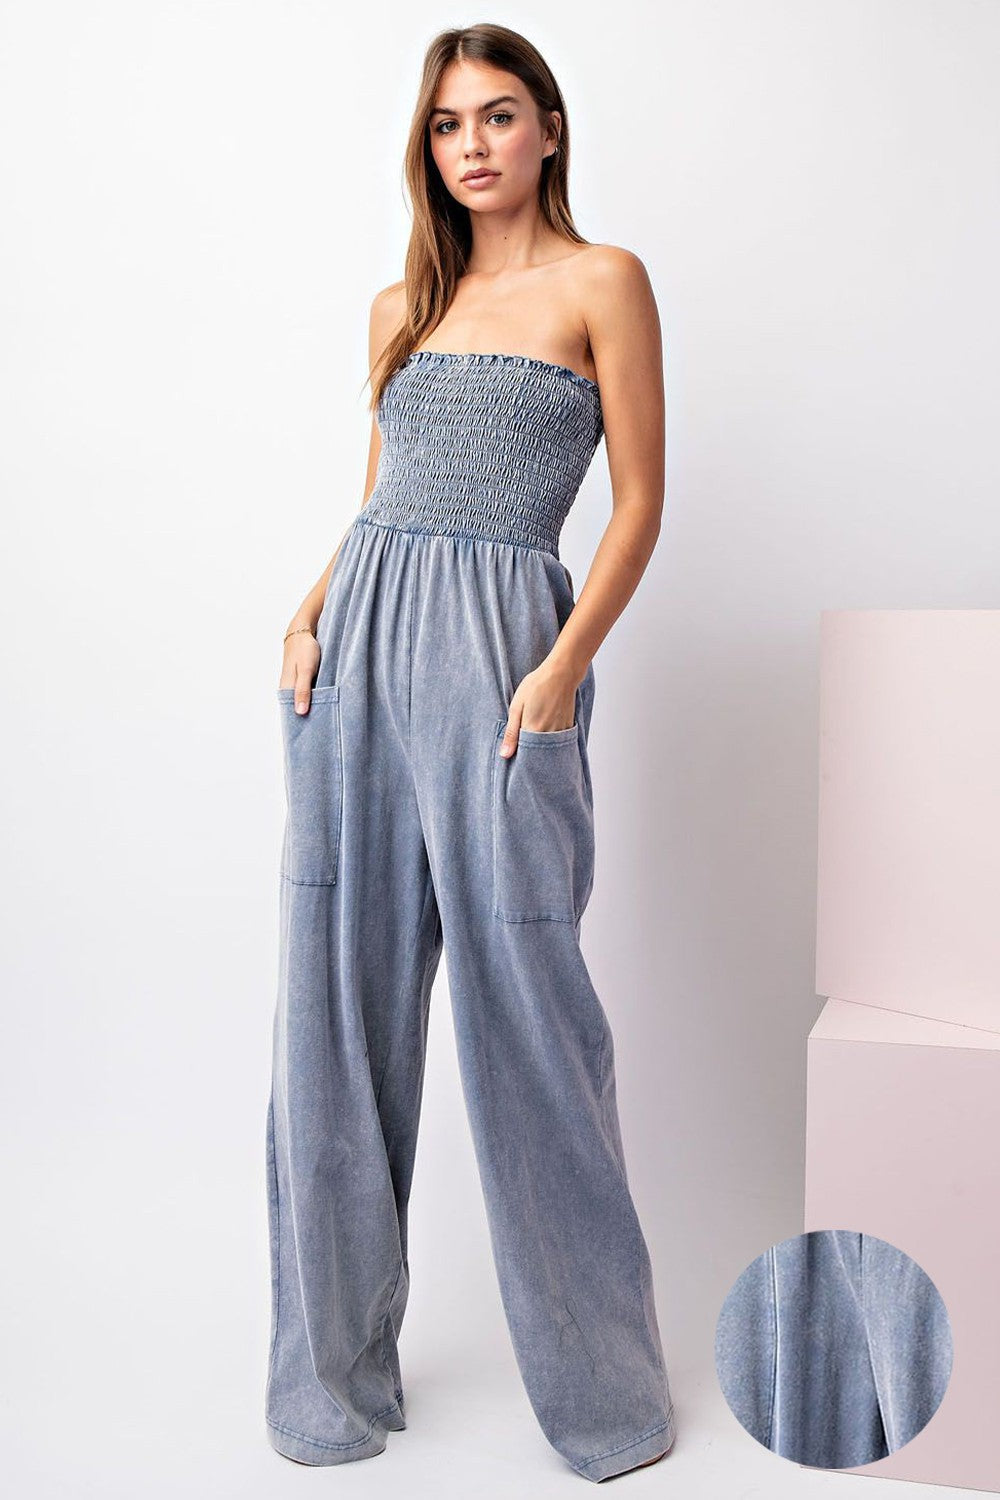 Mineral Washed Strapless Jumpsuit